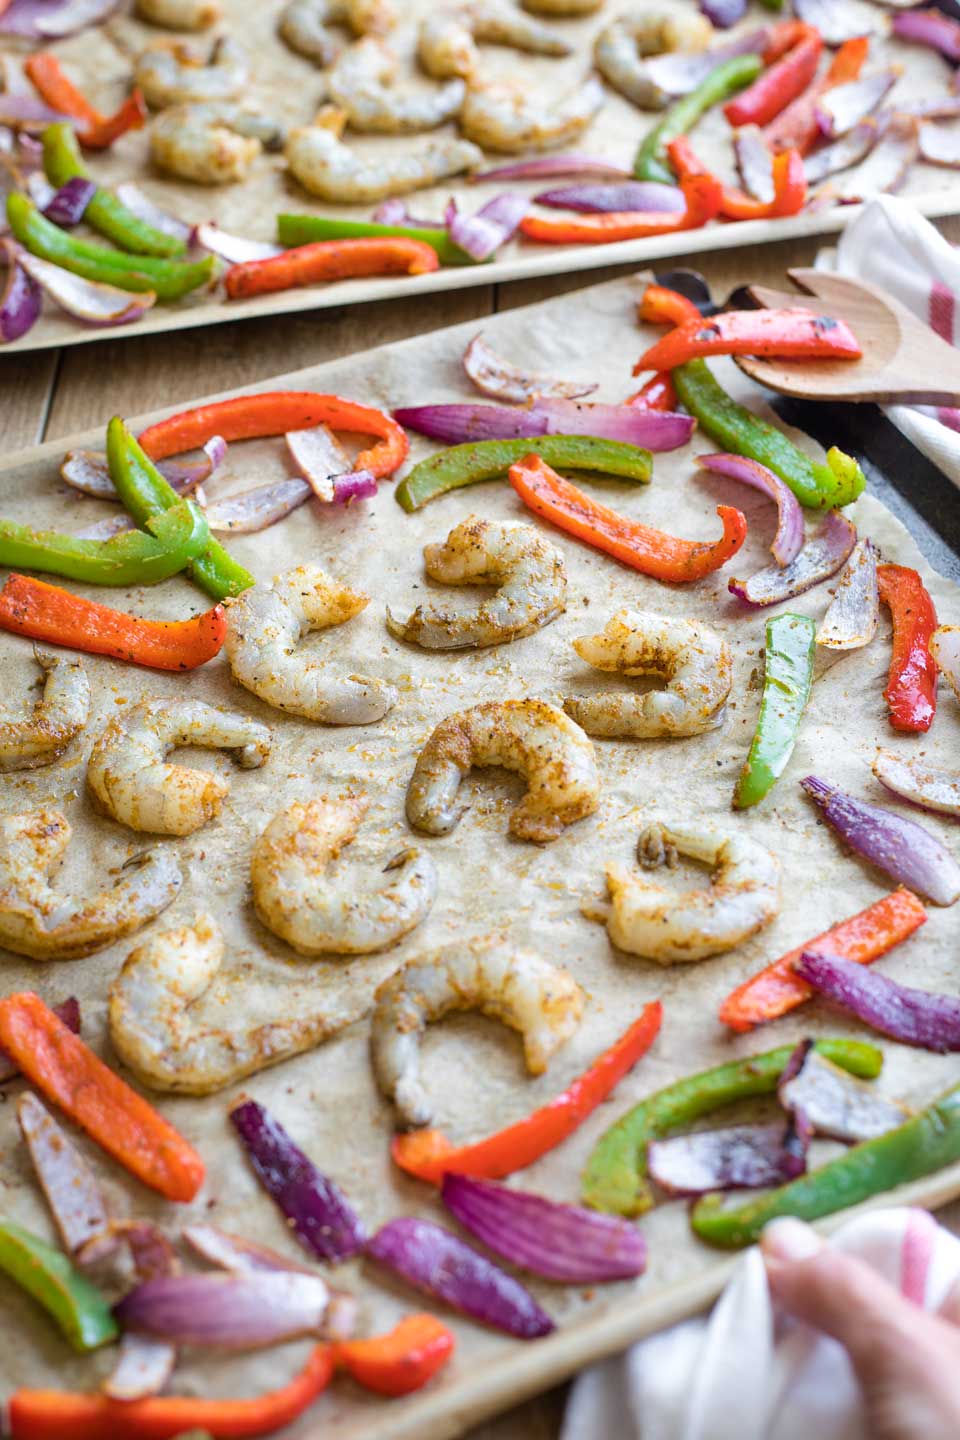 Seasoned raw shrimp being added to the sheet pans after vegetables have begun roasting.